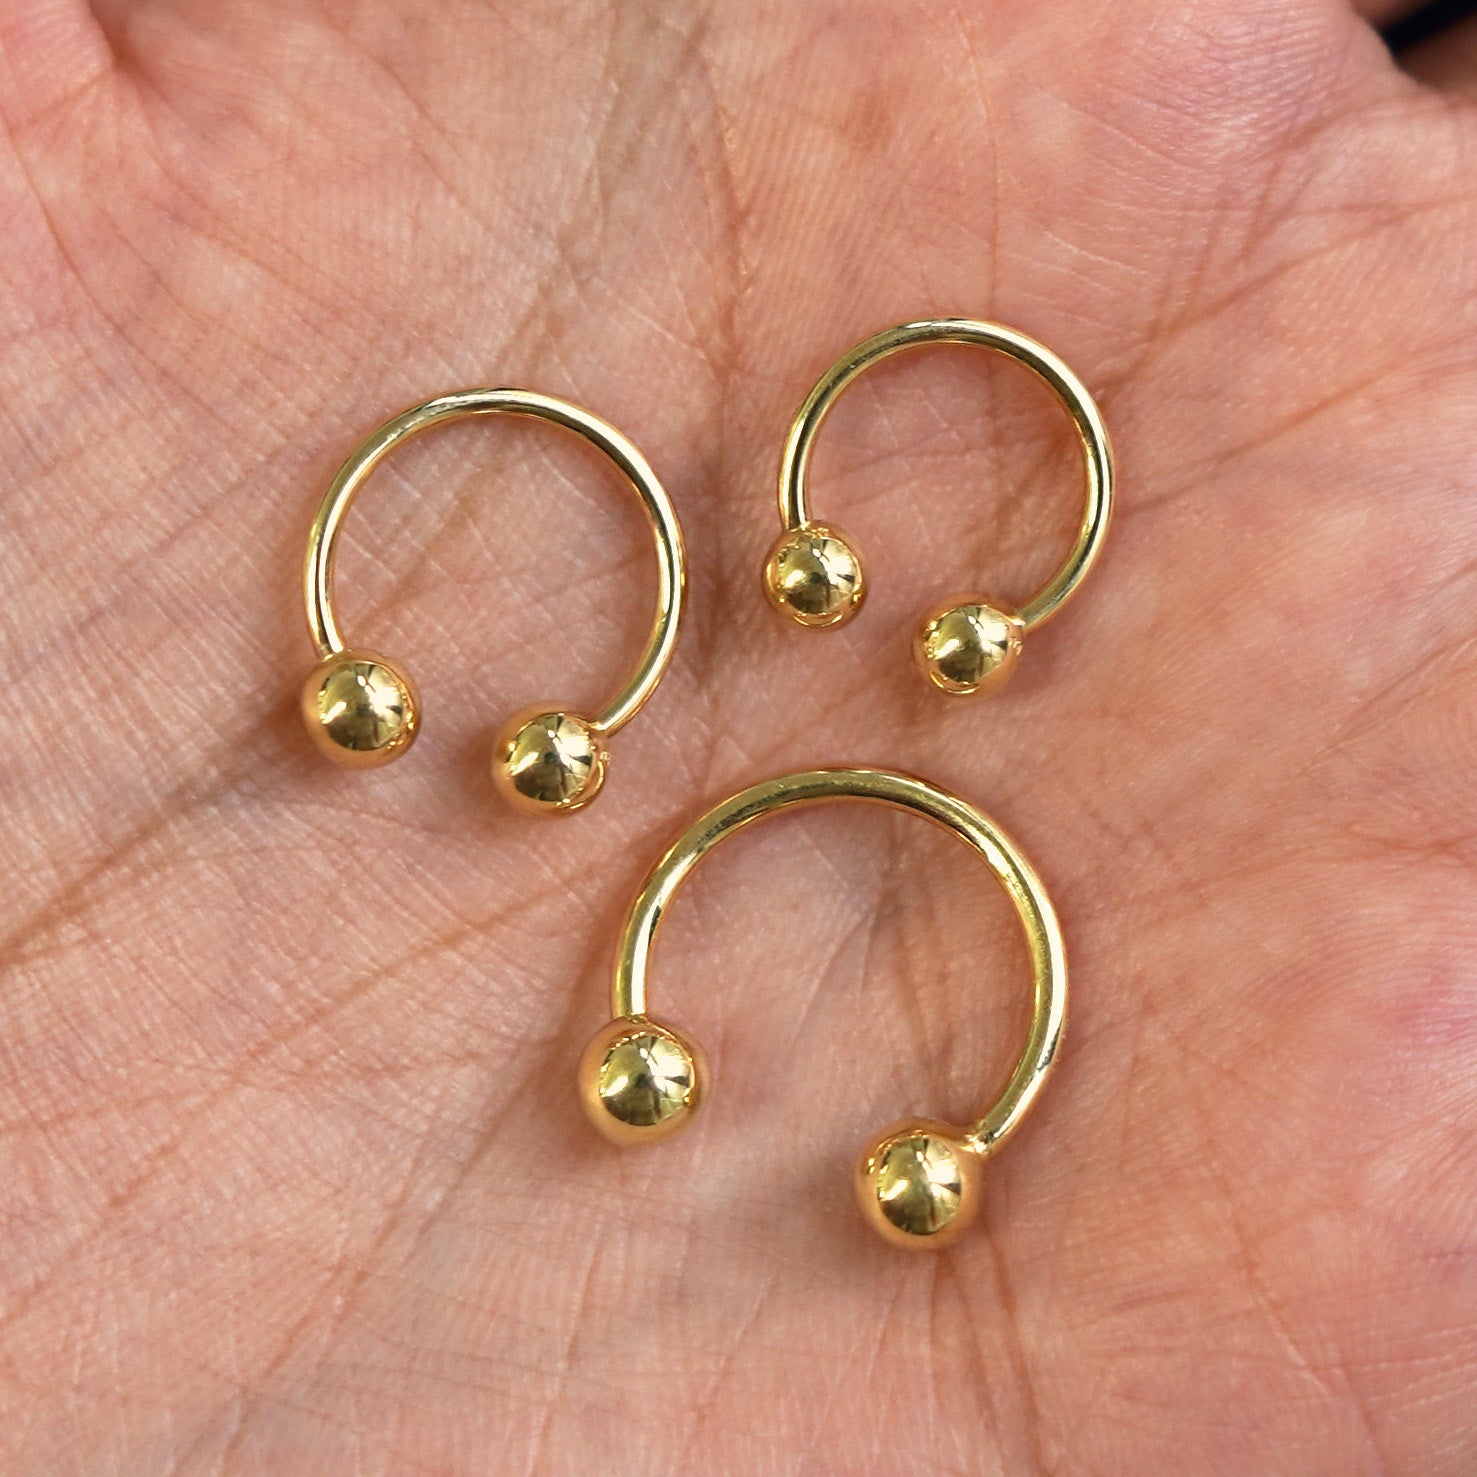 Small, Medium, and Large Horseshoe Piercings placed in a model's hand to show size difference